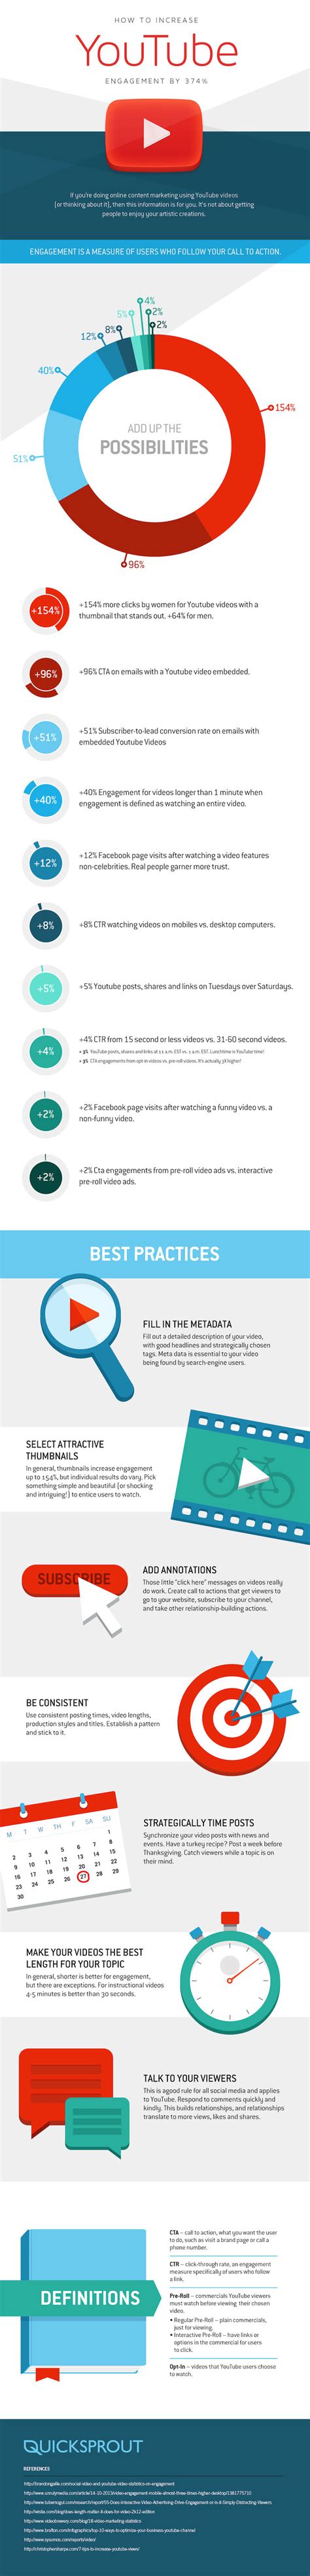 increase  youtube engagement   infographic visualistan